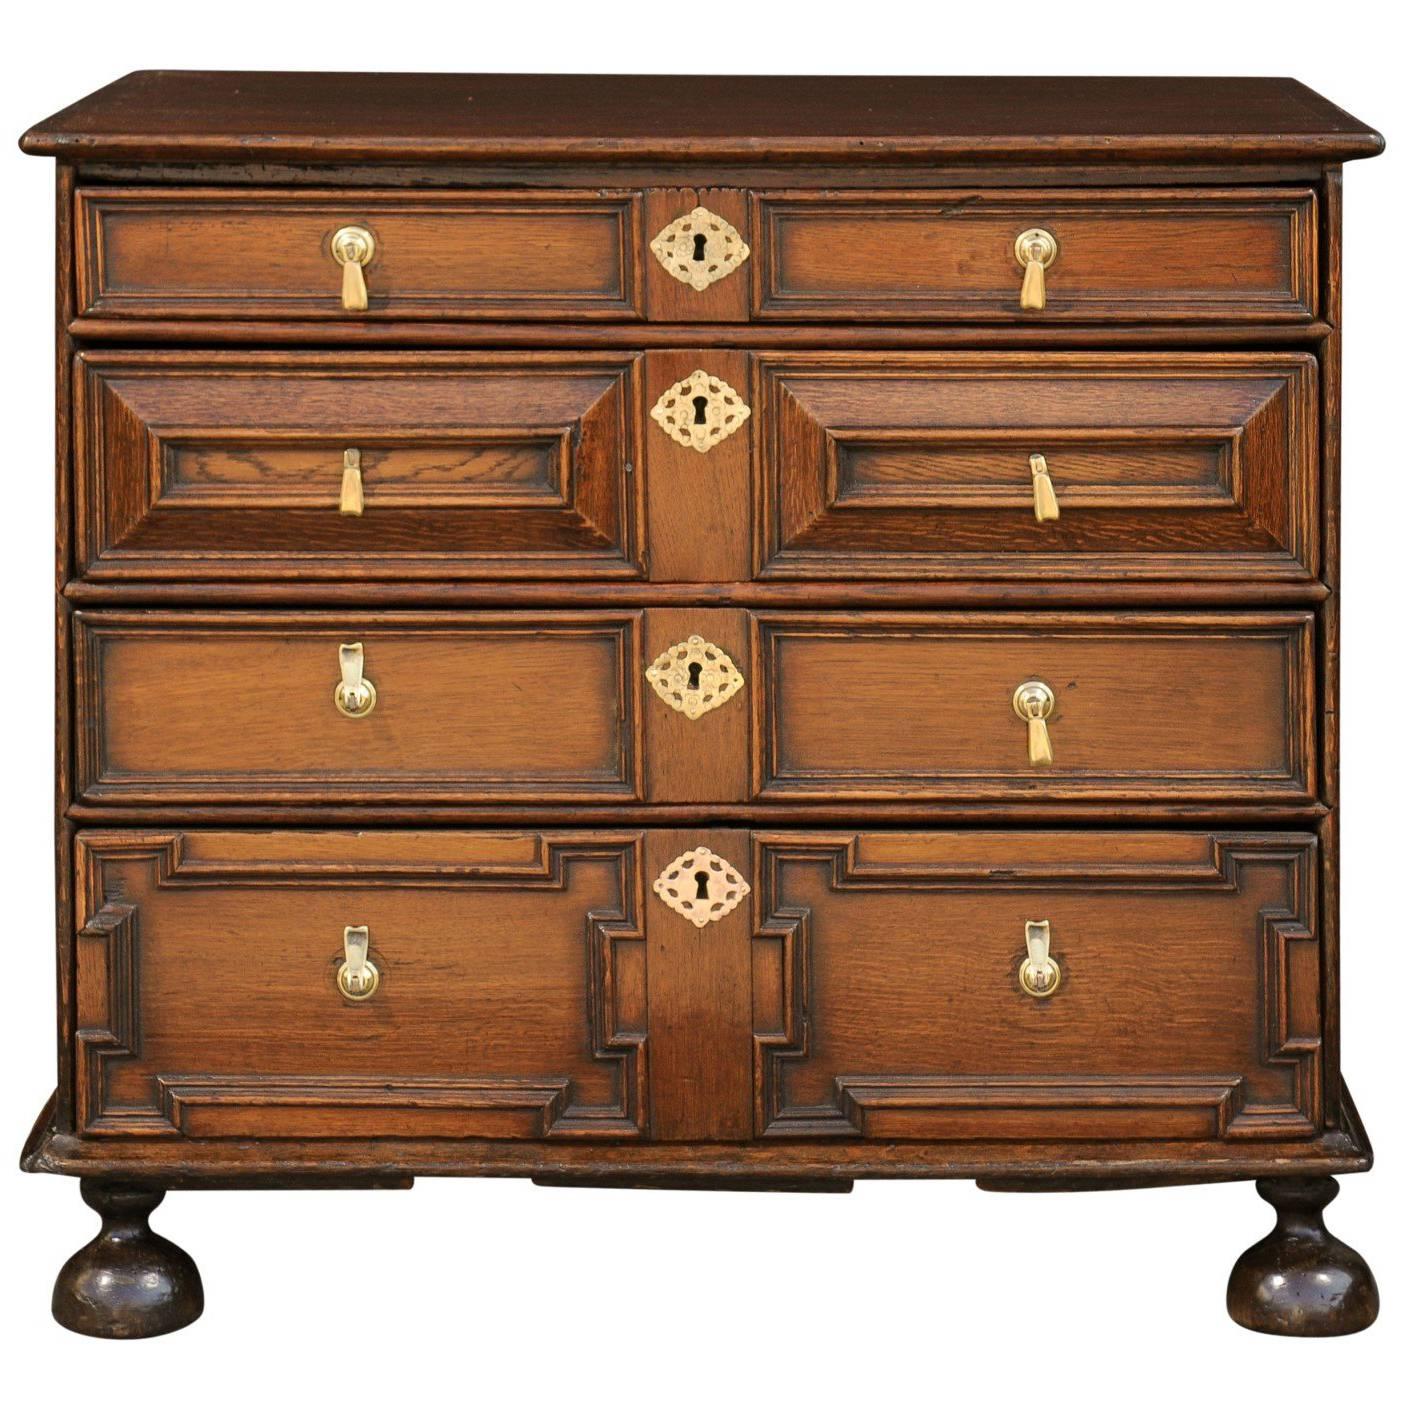 Period George III English Four-Drawer Commode with Geometric Front, circa 1790